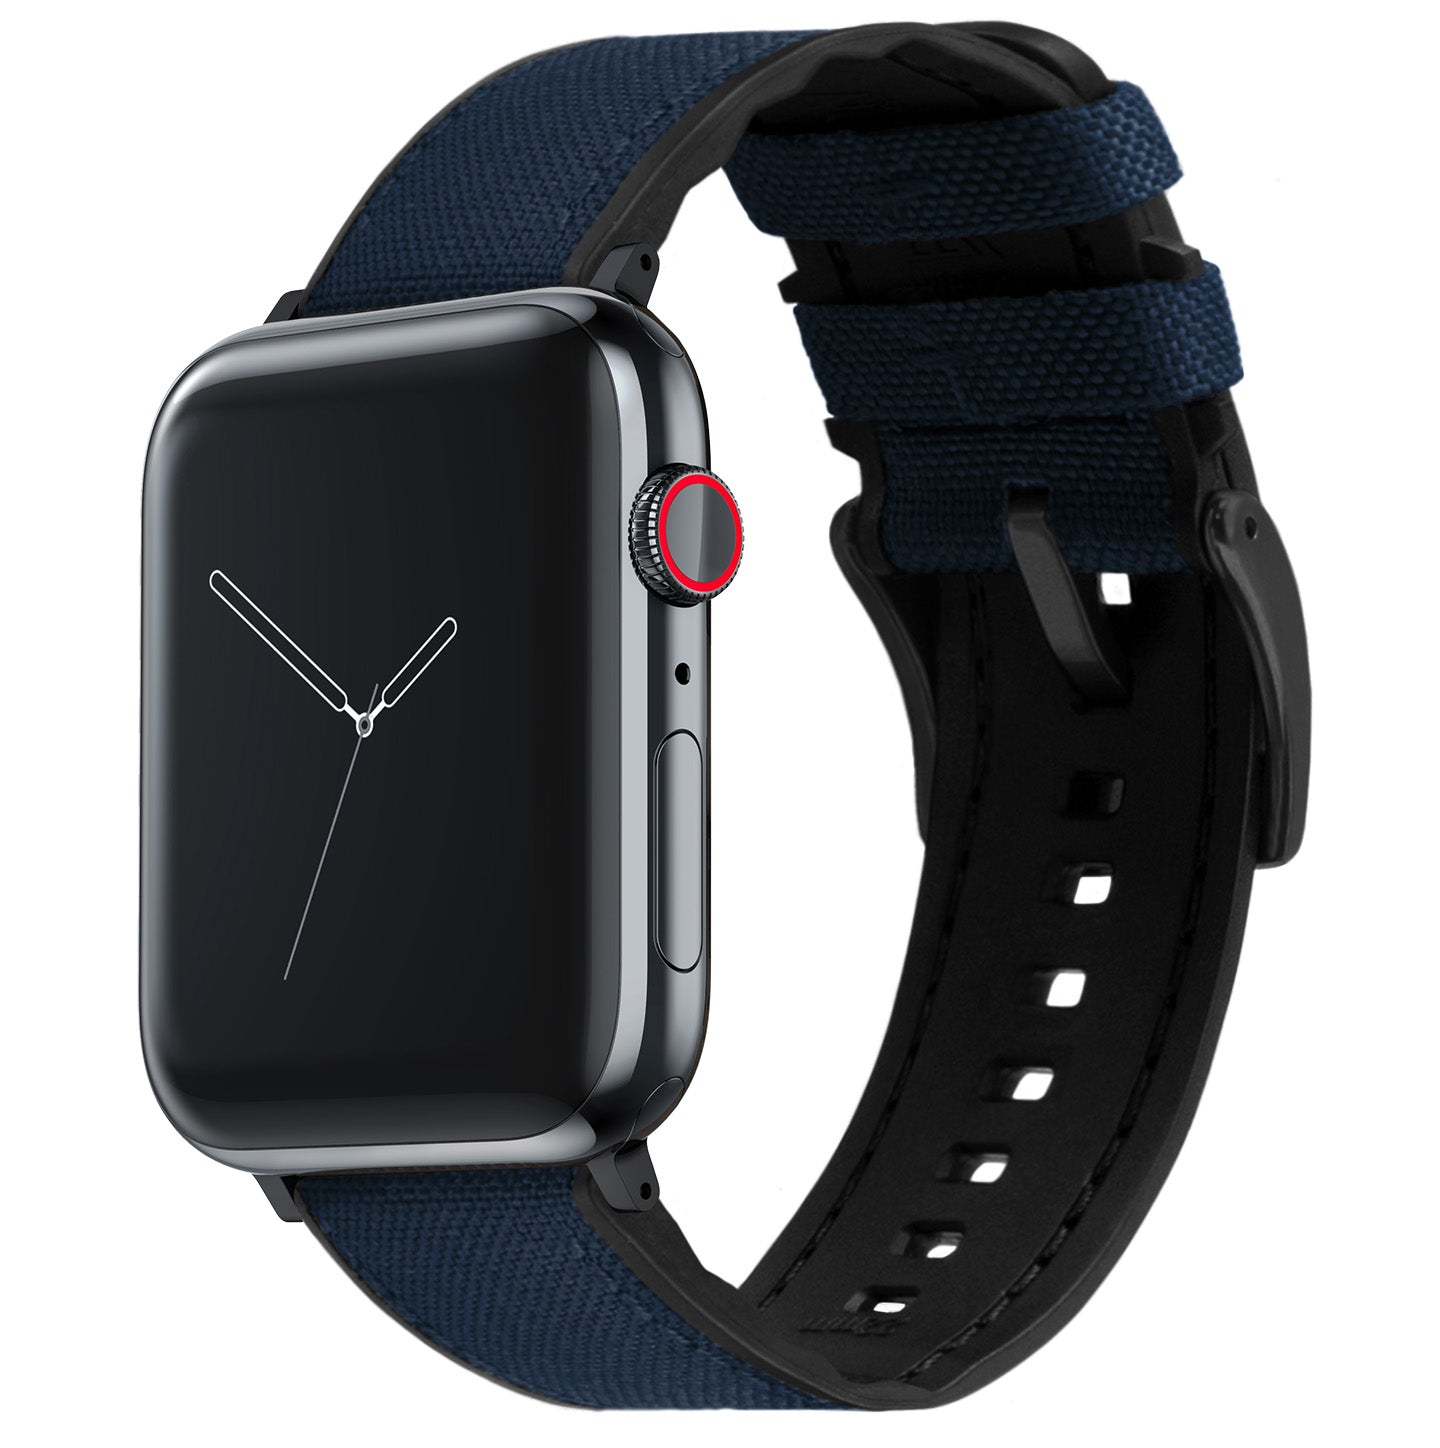 Apple Watch | Navy Blue Cordura Fabric and Silicone Hybrid